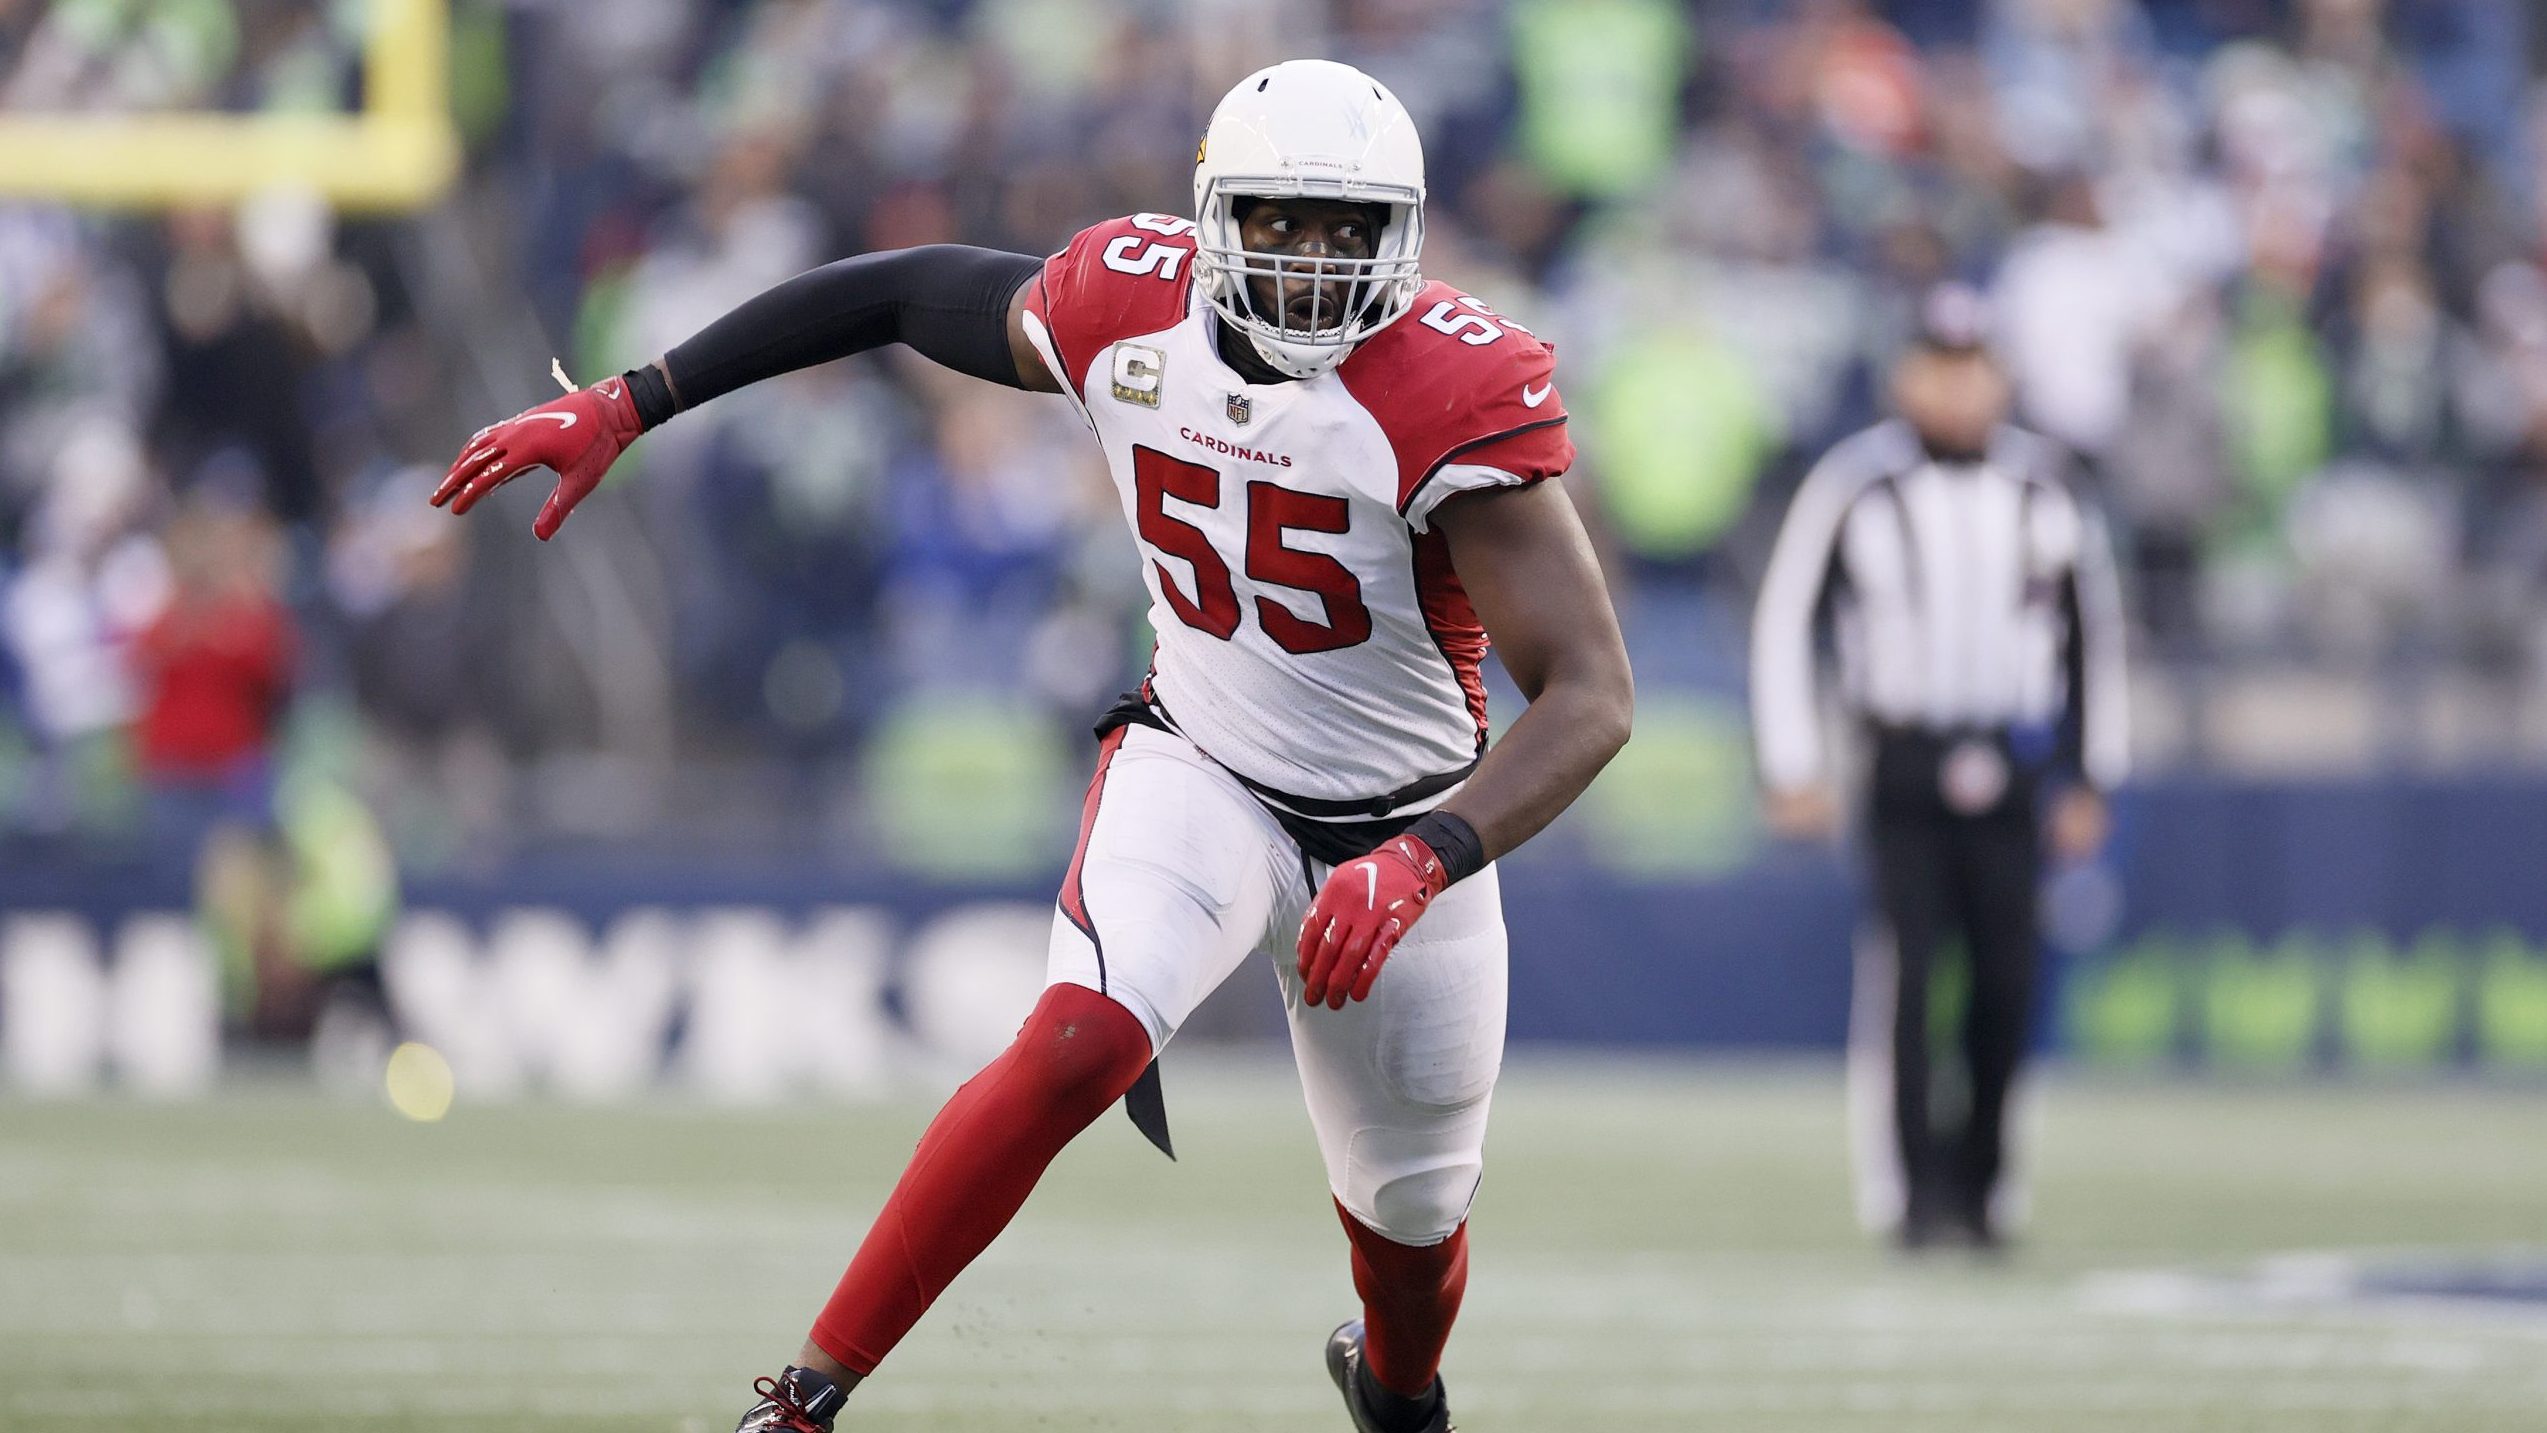 Chandler Jones #55 of the Arizona Cardinals in action against the Seattle Seahawks during the secon...